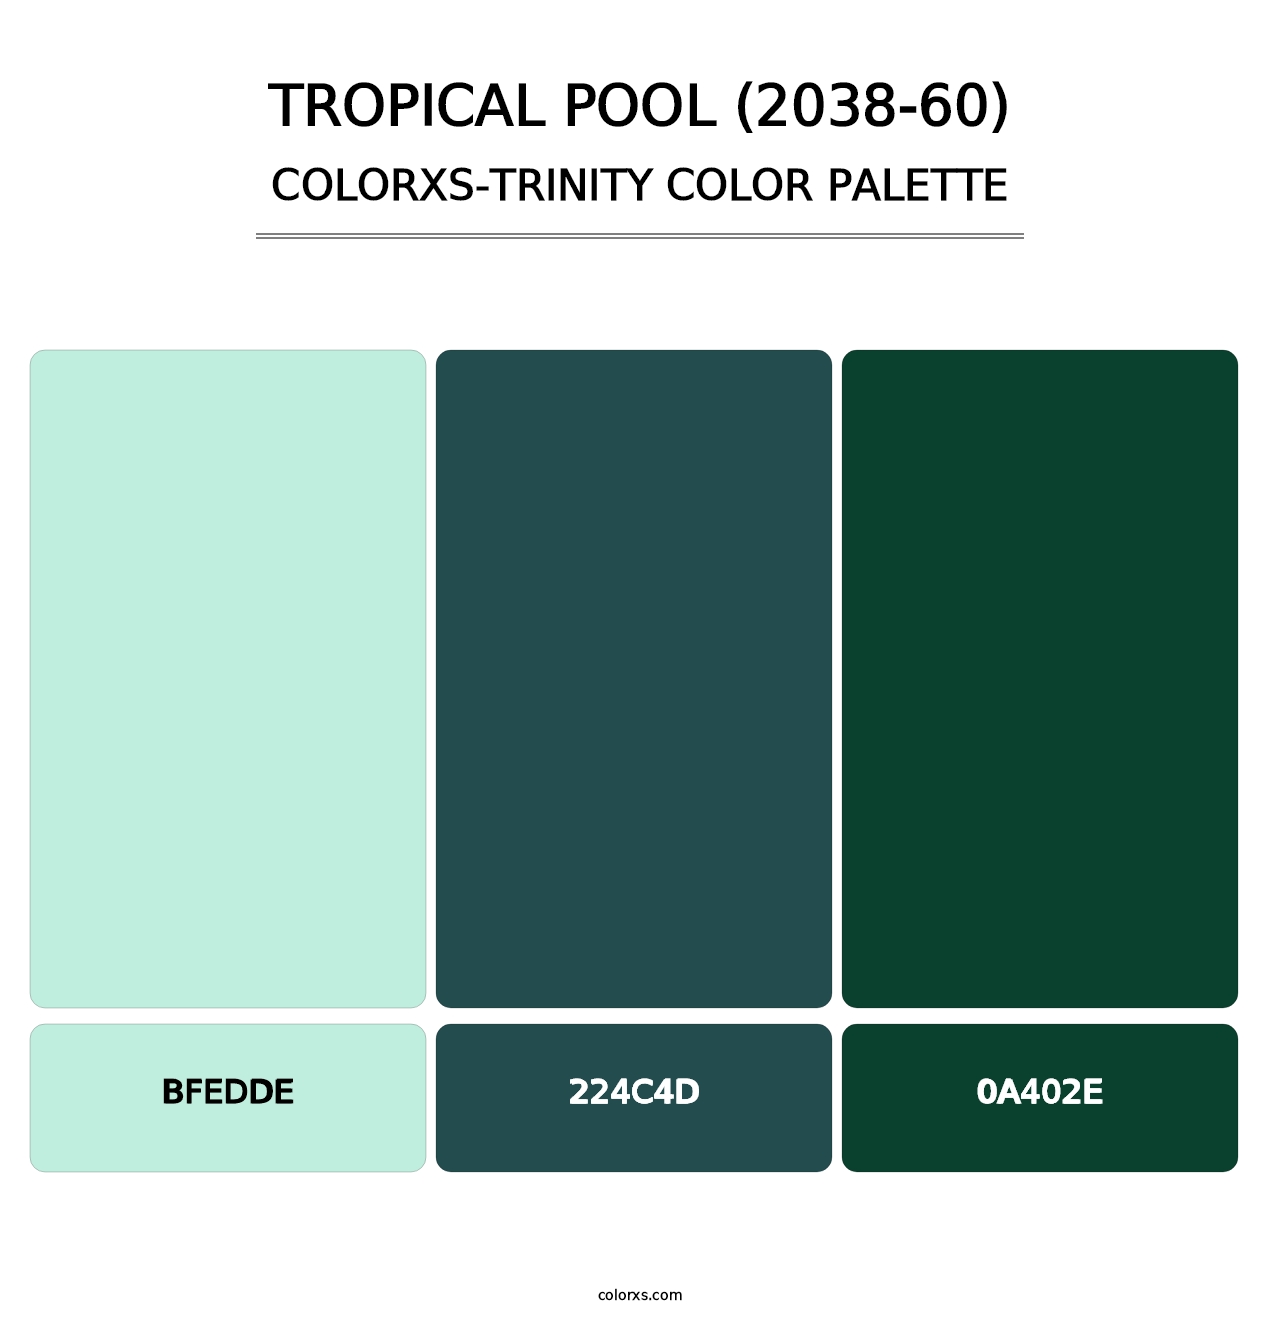 Tropical Pool (2038-60) - Colorxs Trinity Palette